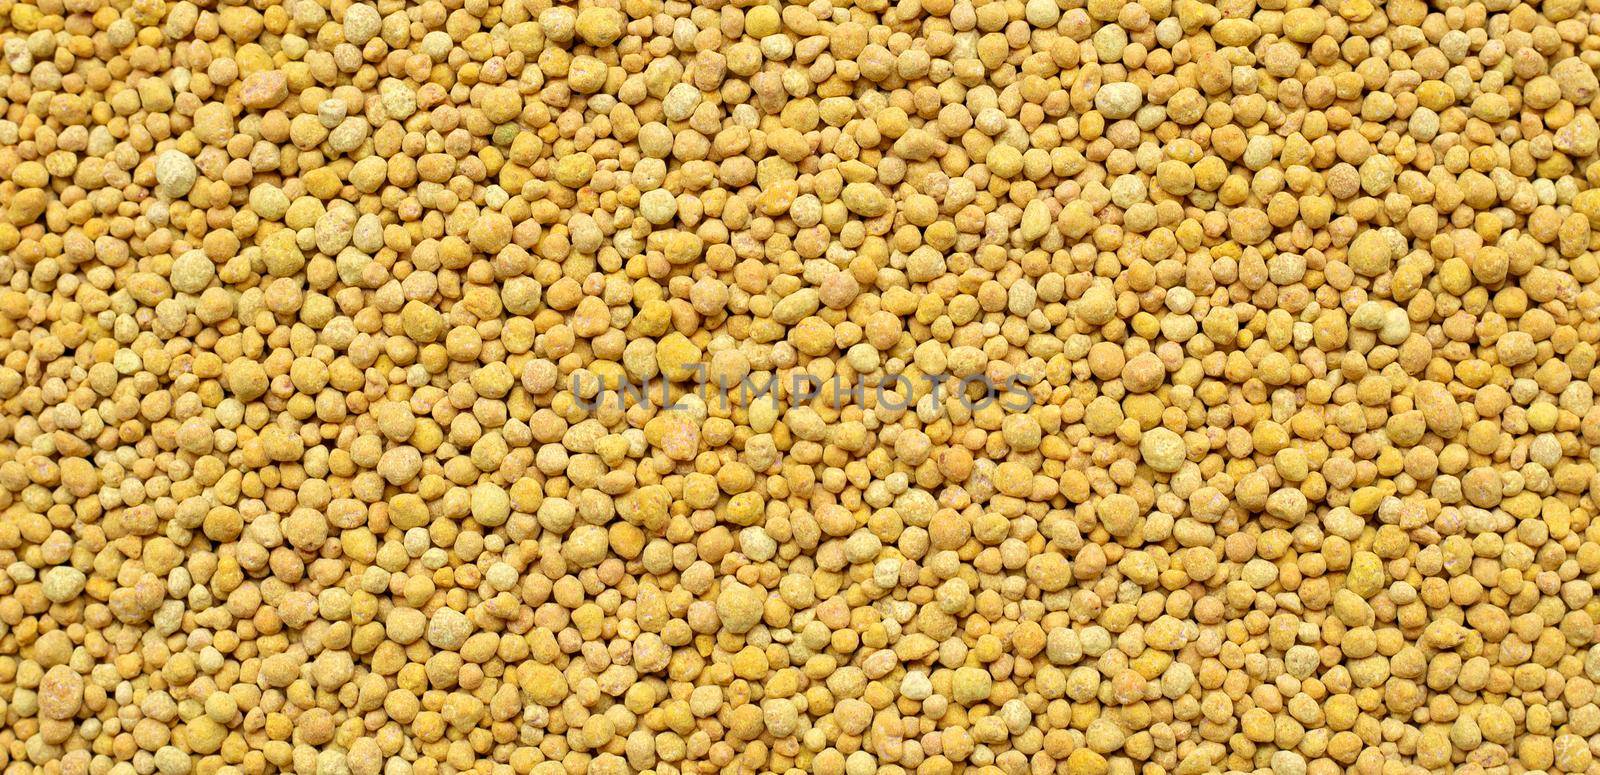 Top view of Chemical fertilizer for planting